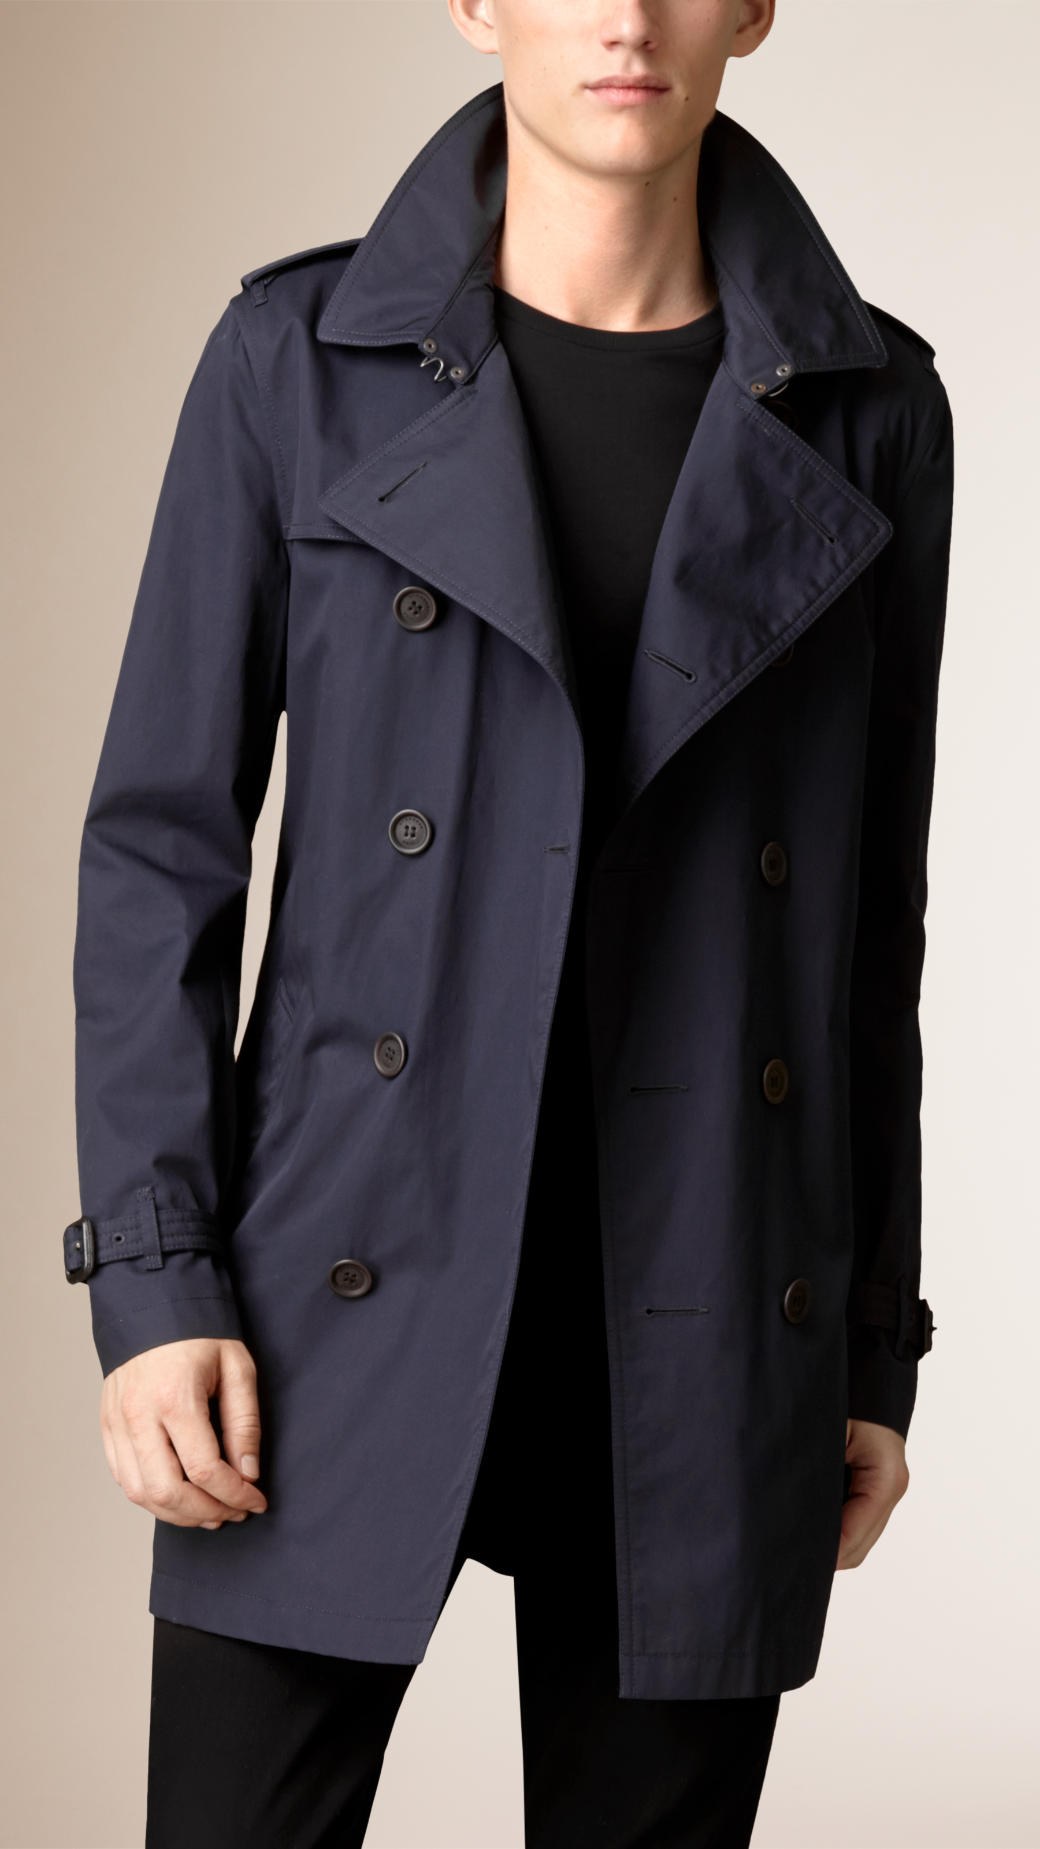 Burberry Cotton Twill Trench Coat in Blue for Men - Lyst